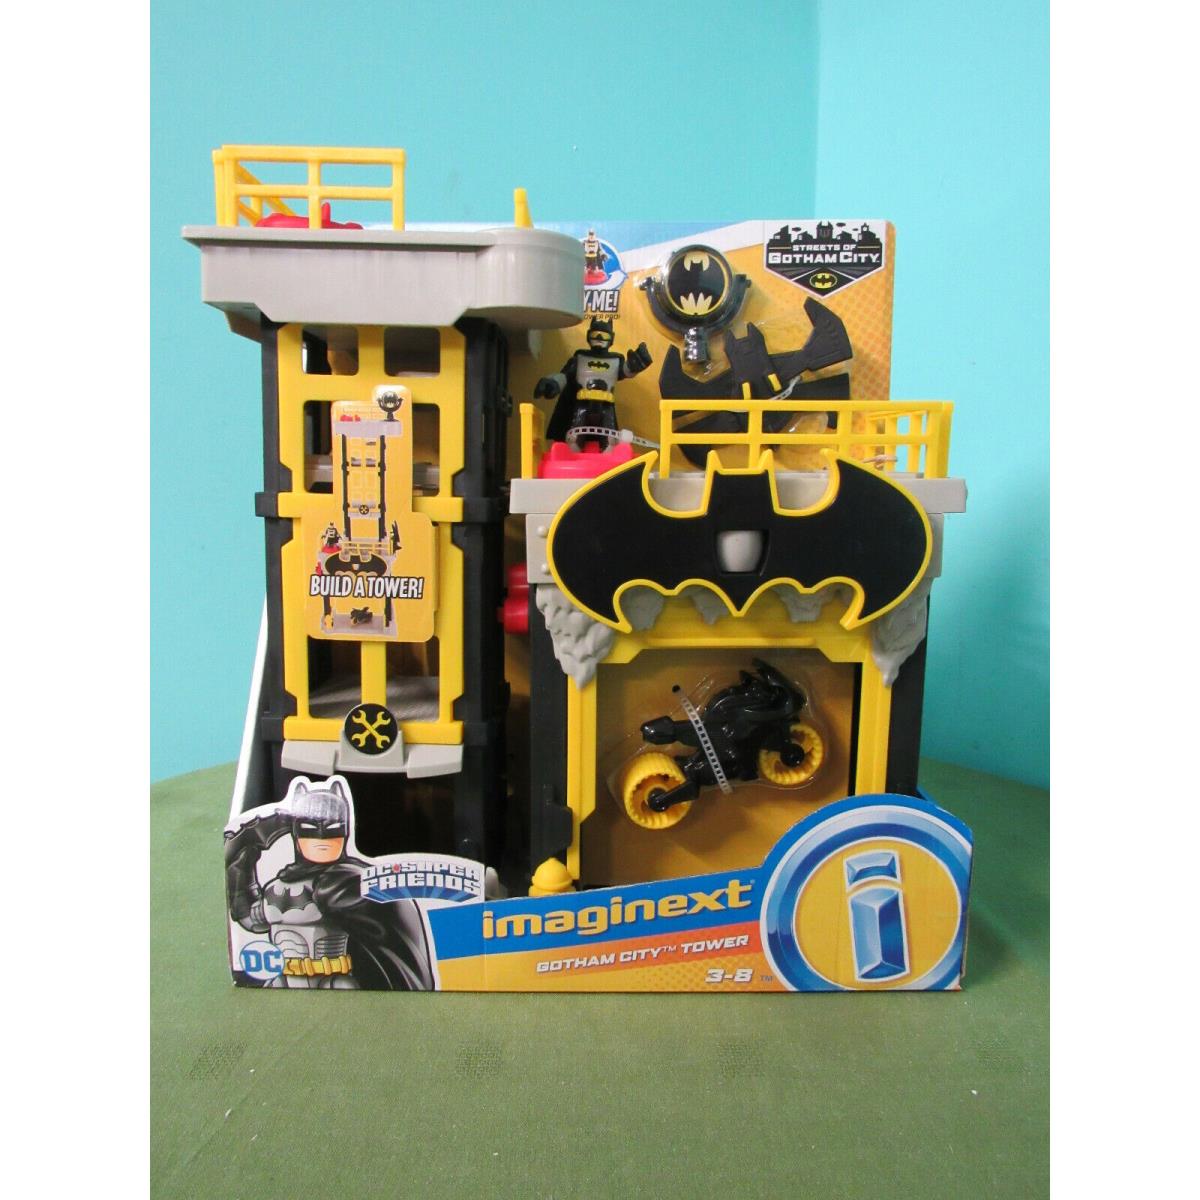 Fisher-price Imaginext DC Super Friends Streets of Gotham City Tower Play-set